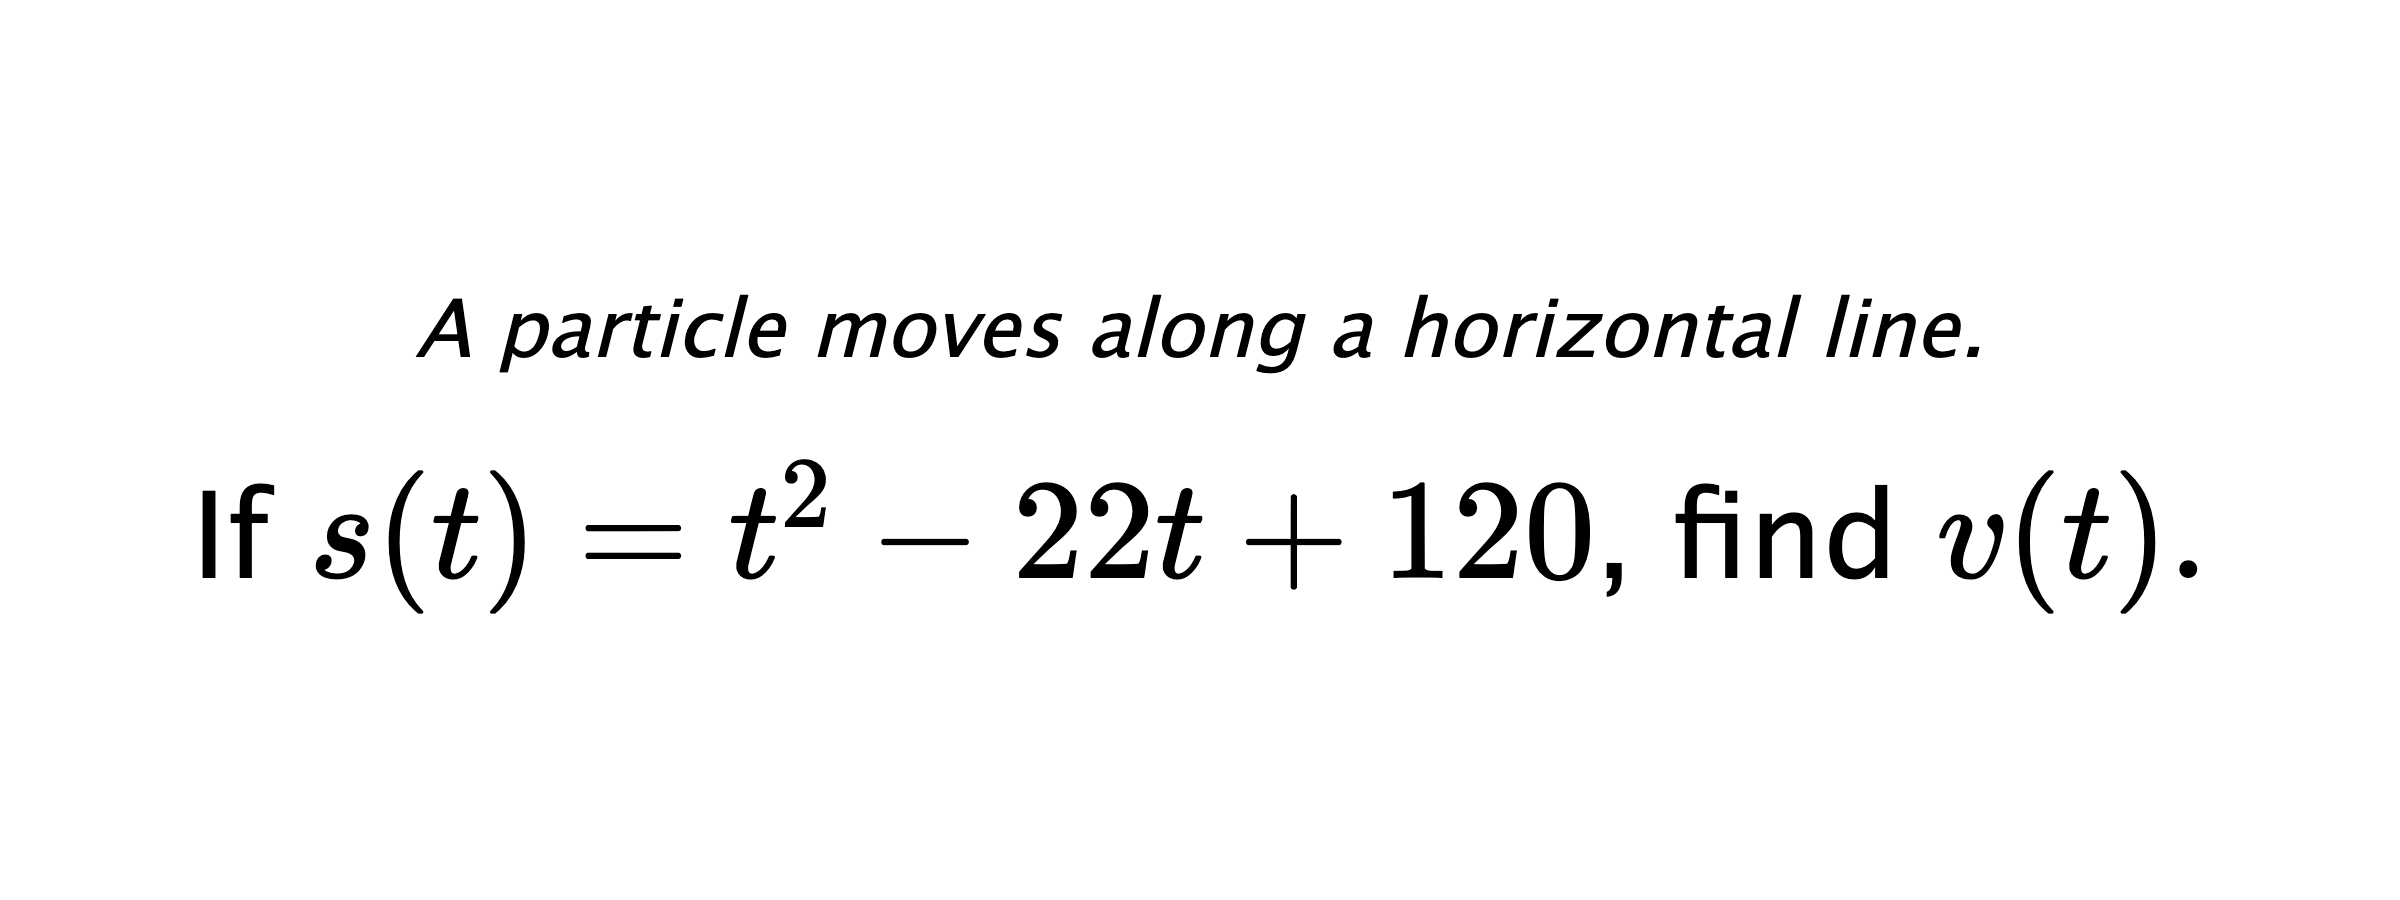 A particle moves along a horizontal line. If $ s(t)=t^2-22t+120 $, find $ v(t). $